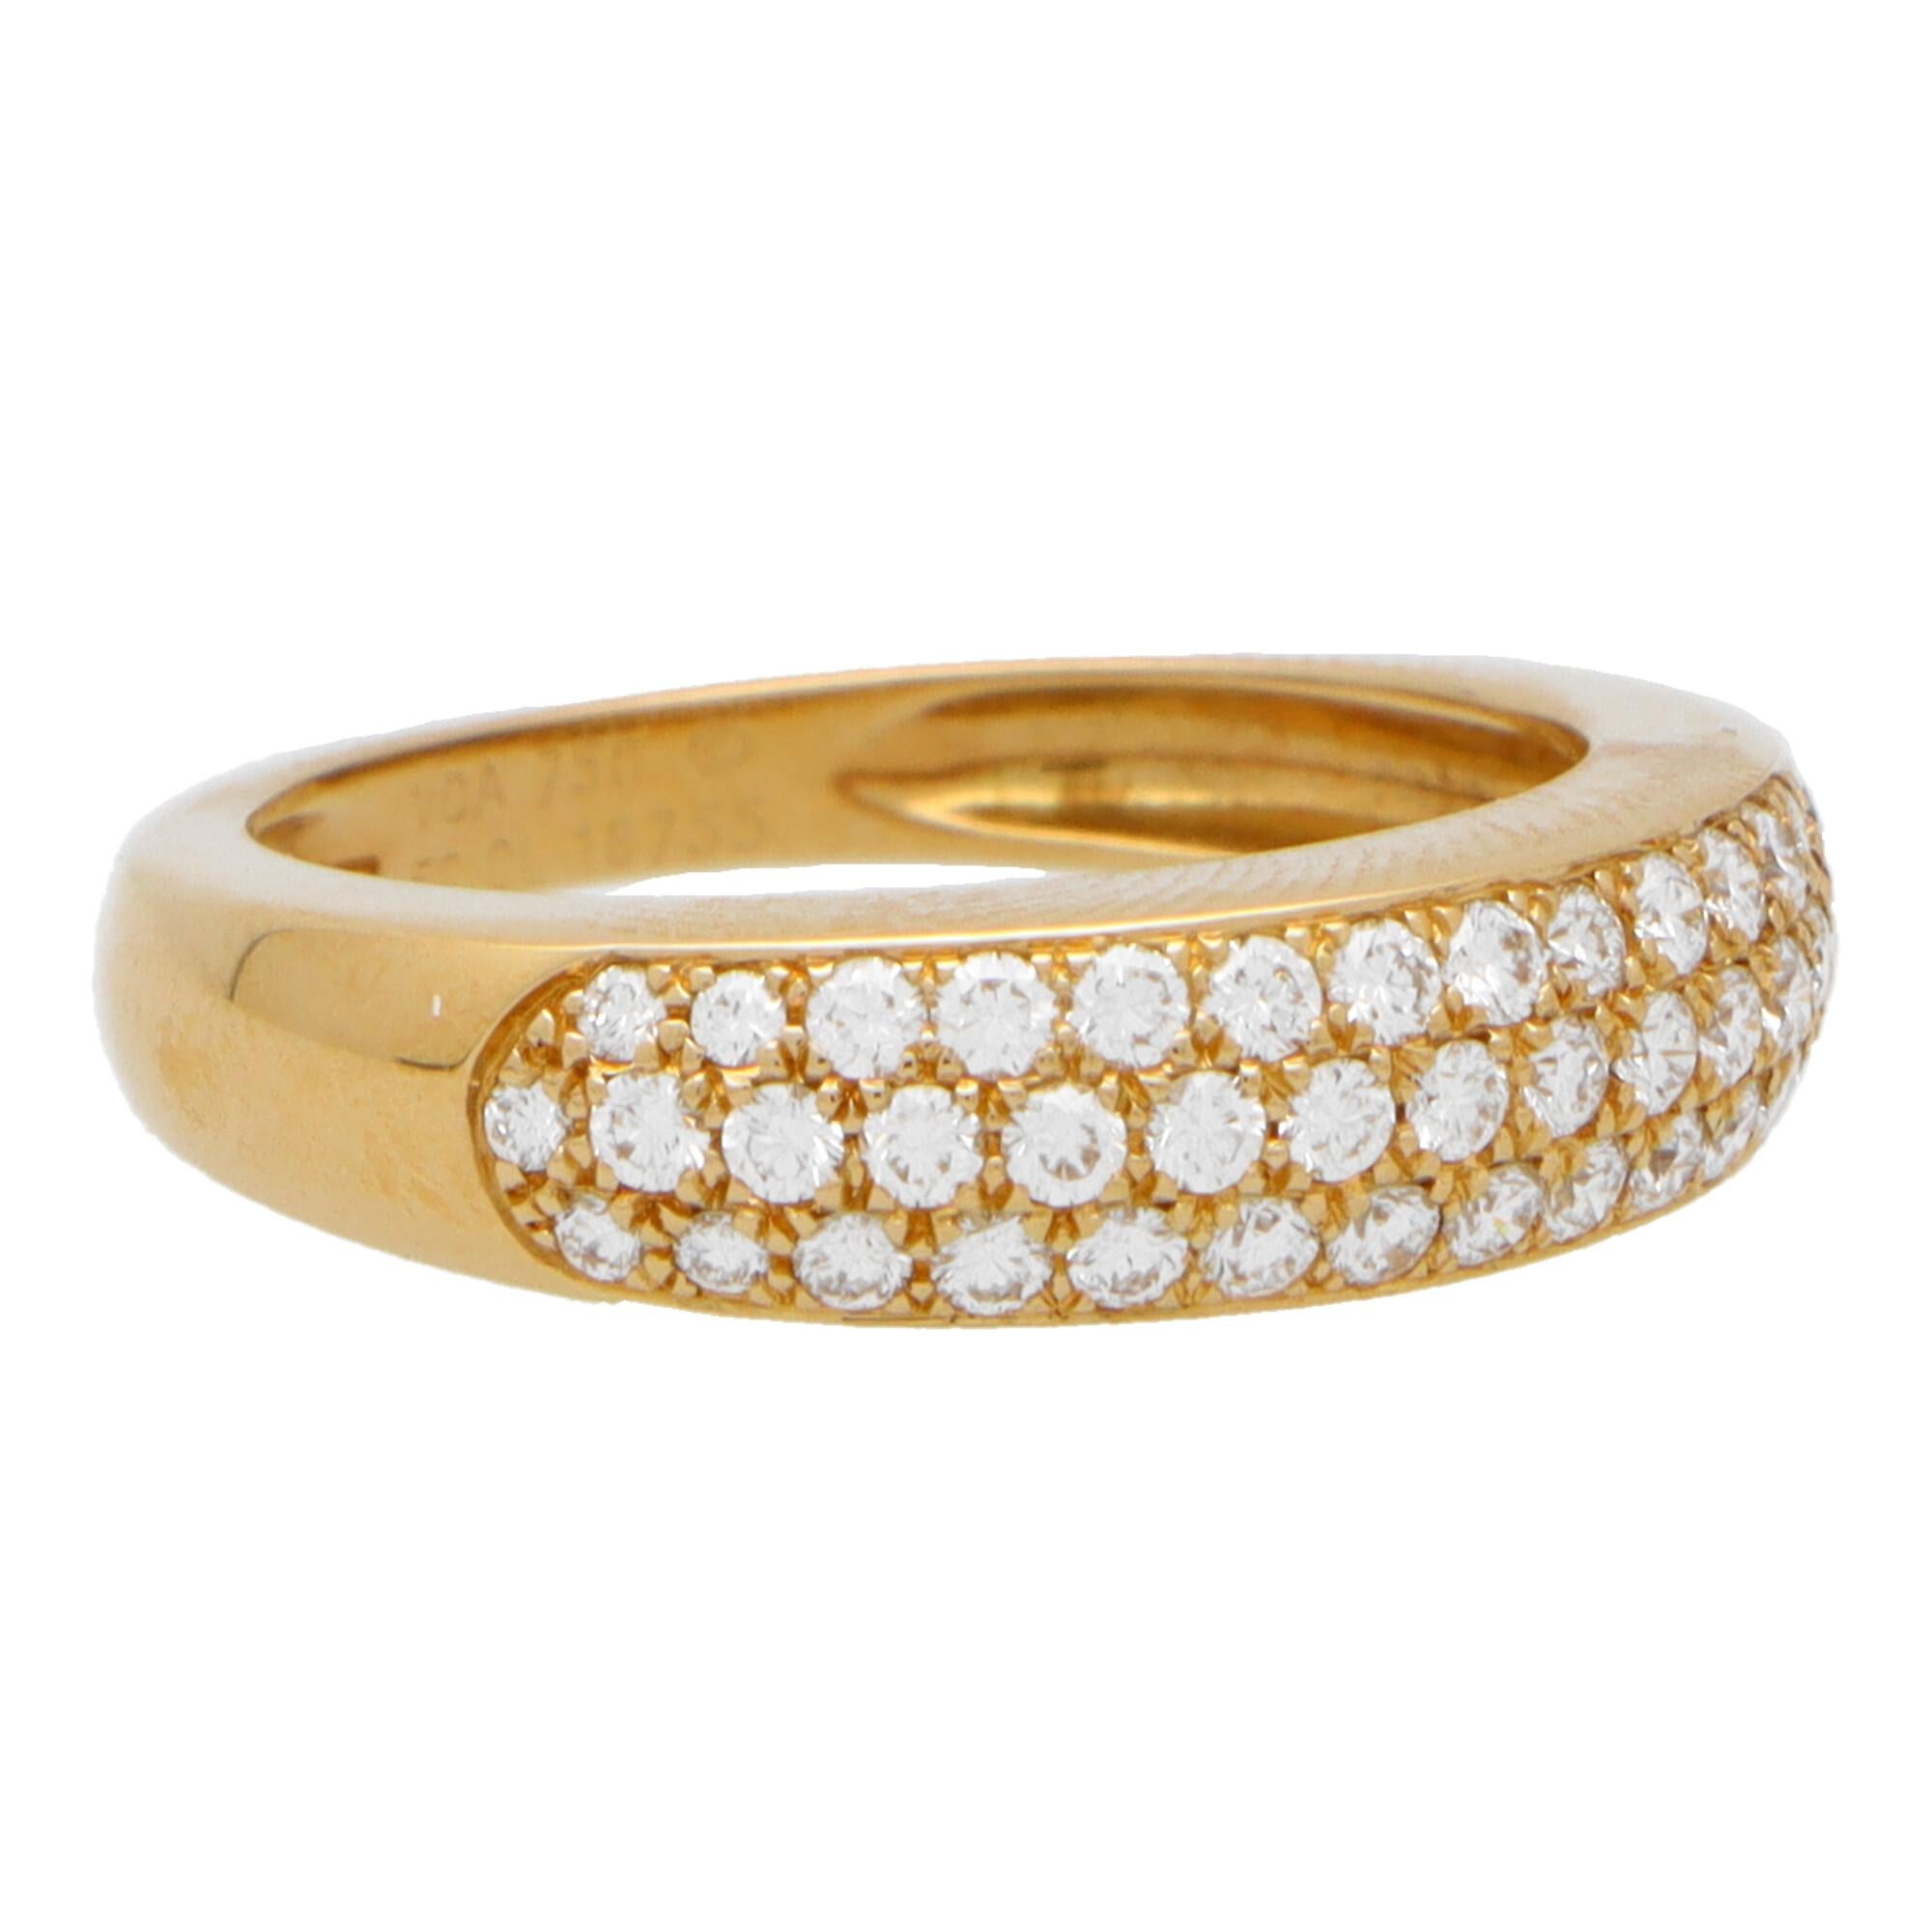 A beautiful vintage Van Cleef & Arpels diamond band ring set in 18k yellow gold. 

The ring is comprised of three rows of round brilliant cut diamonds which are pavé set in a subtle bombé design. The shoulders of the band graduate elegantly round to